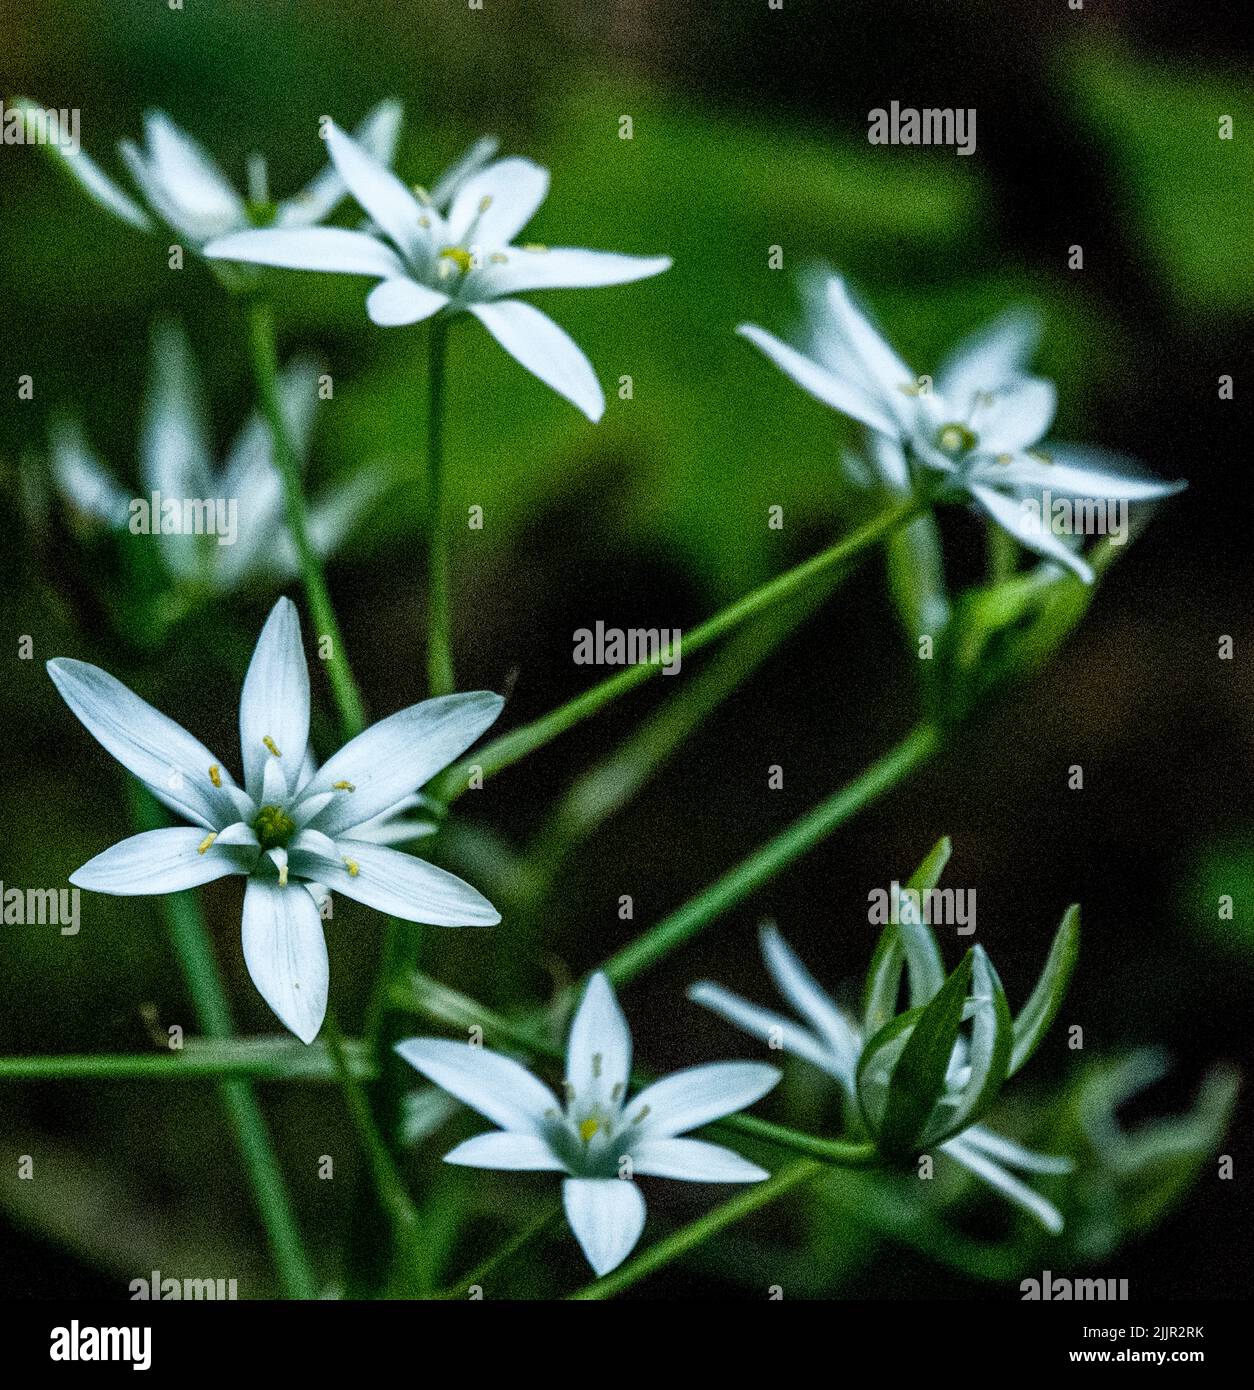 A closeup shot of a white Ornithogalum flowers on a blurry background Stock Photo